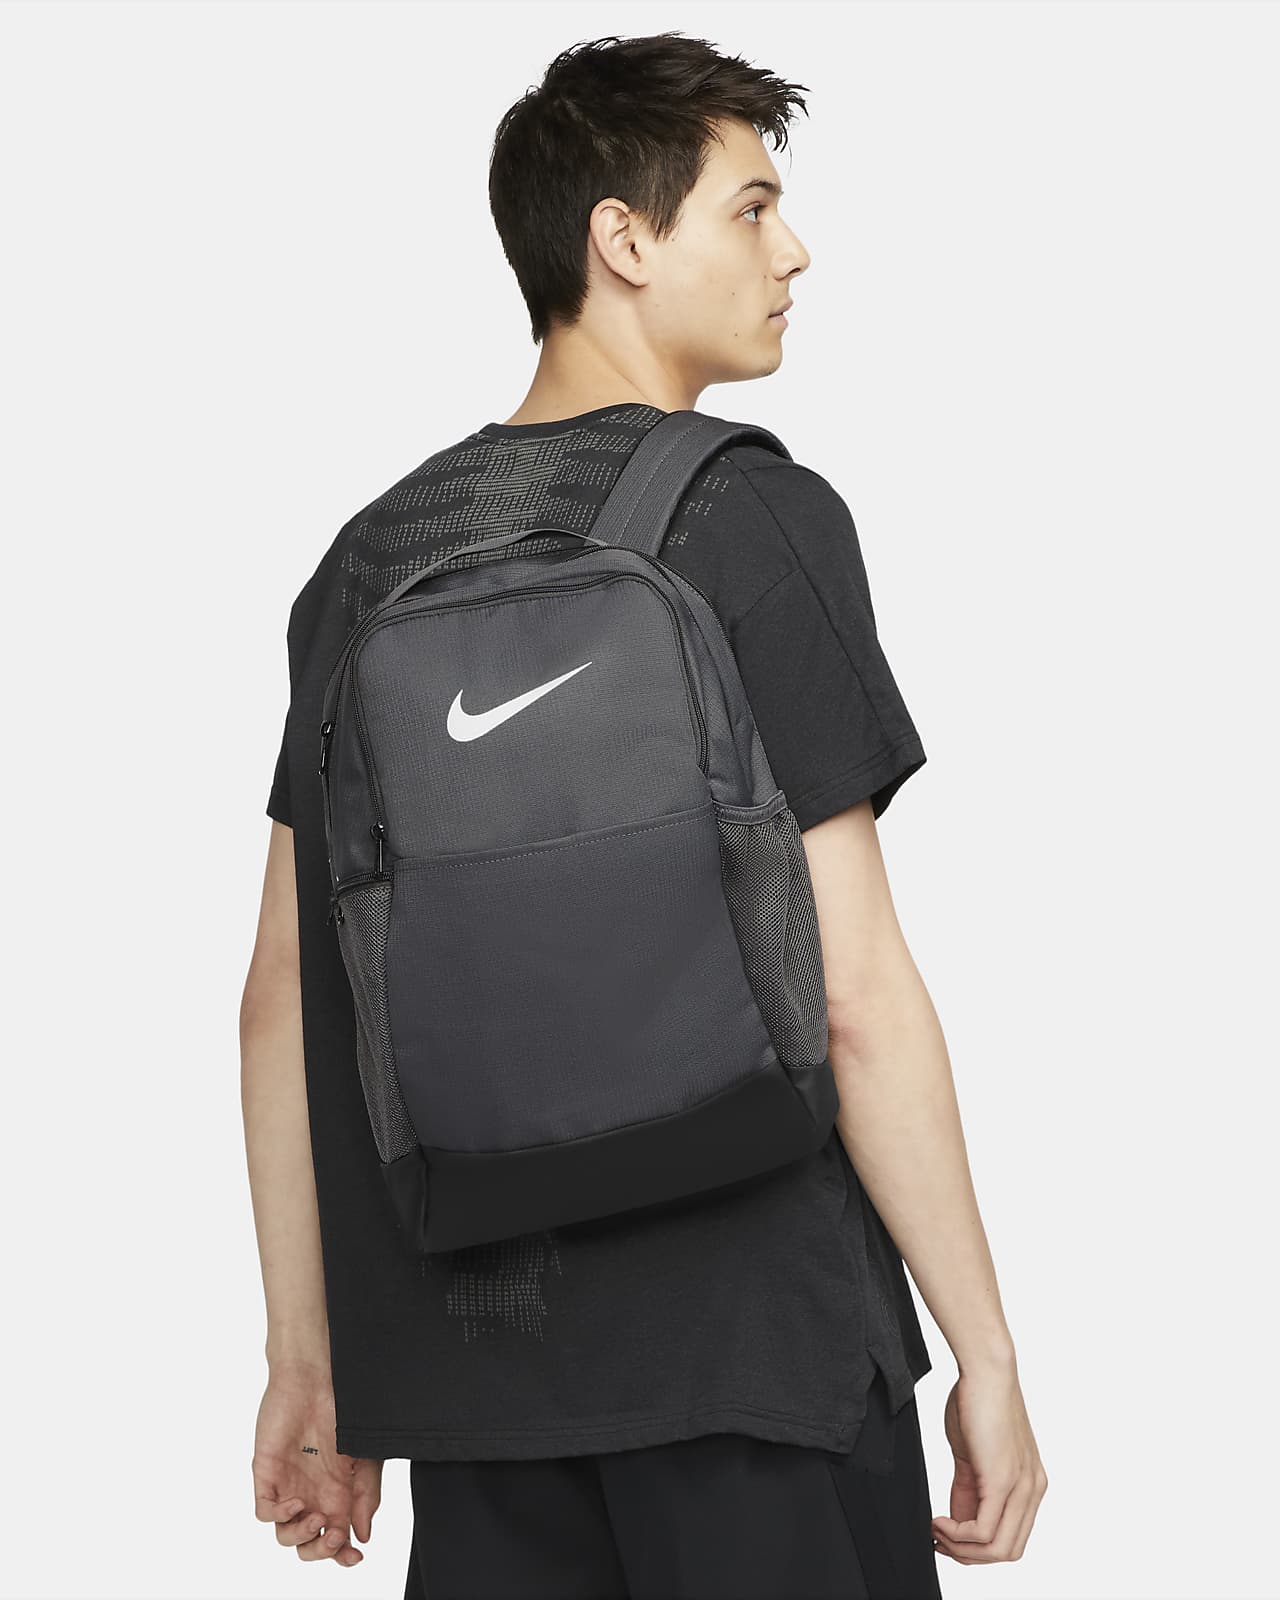 Nike Brasilia 9.5 Medium Backpack Navy Grab your gear and get going with  the Nike Brasilia Backpack. It has plenty of pockets to help you stay  organized including a sleeve to fit